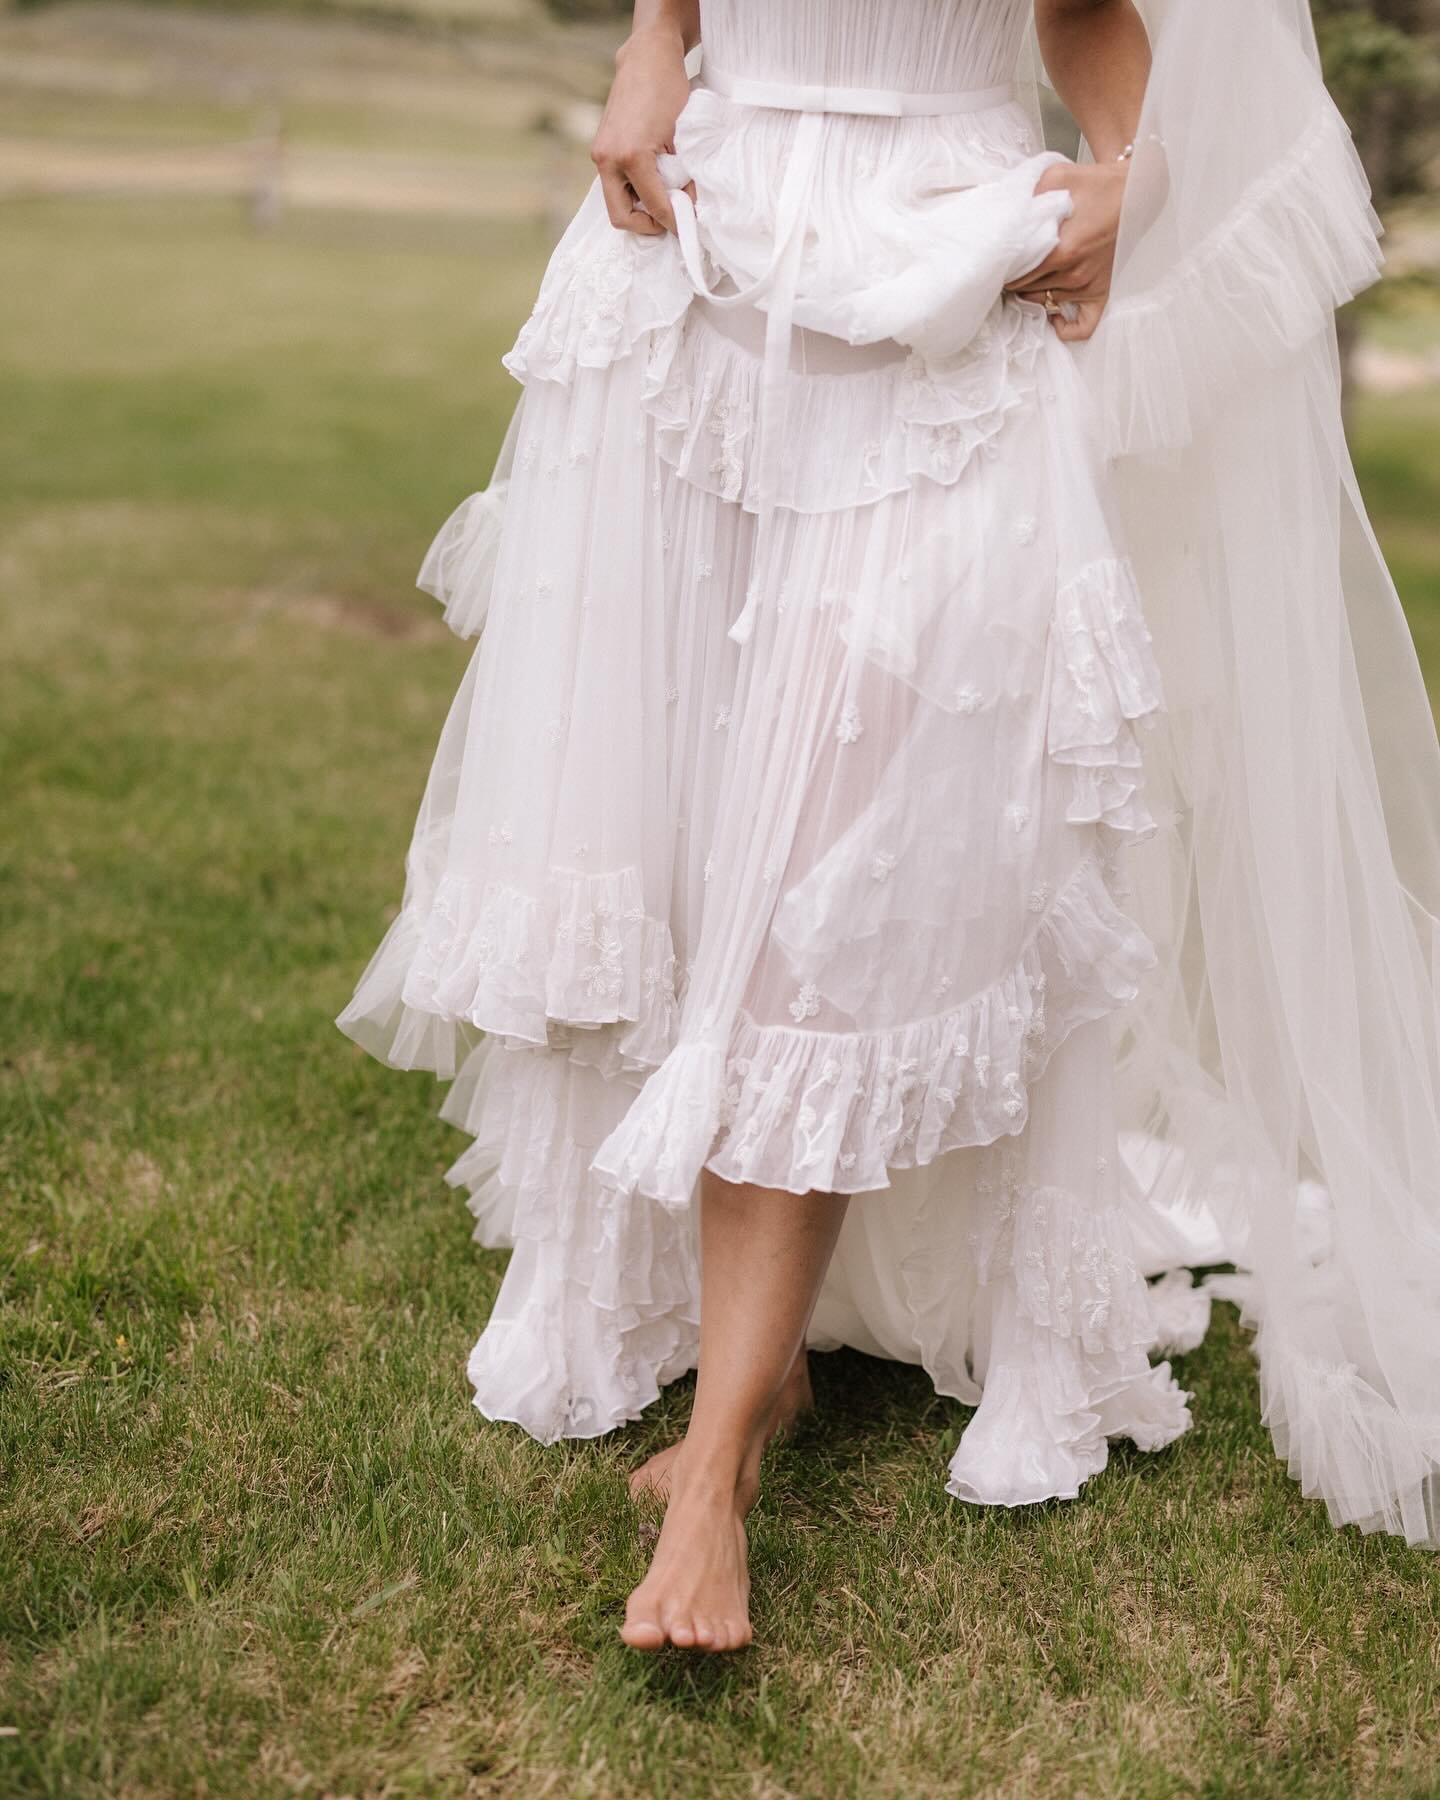 barefoot + breezy. I think @taylor_hill created a whole summer bride vibe.

can&rsquo;t wait to frolic through these mountains again this summer.

&mdash;&mdash;&mdash;

@vogueweddings 
@etro 
@table6productions 
@devilsthumbranch